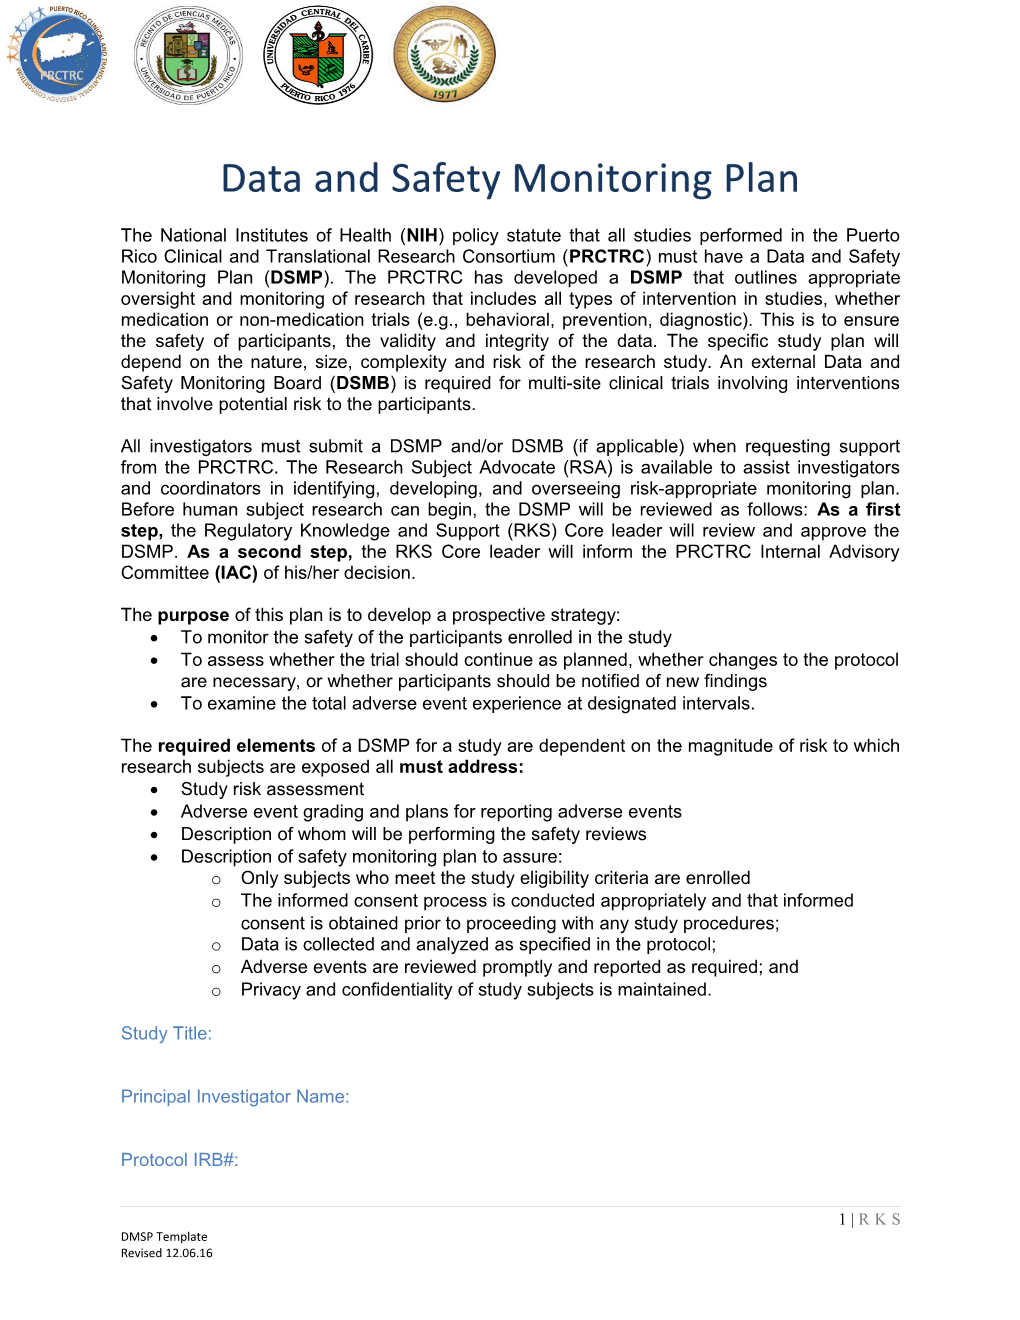 Data and Safety Monitoring Plan